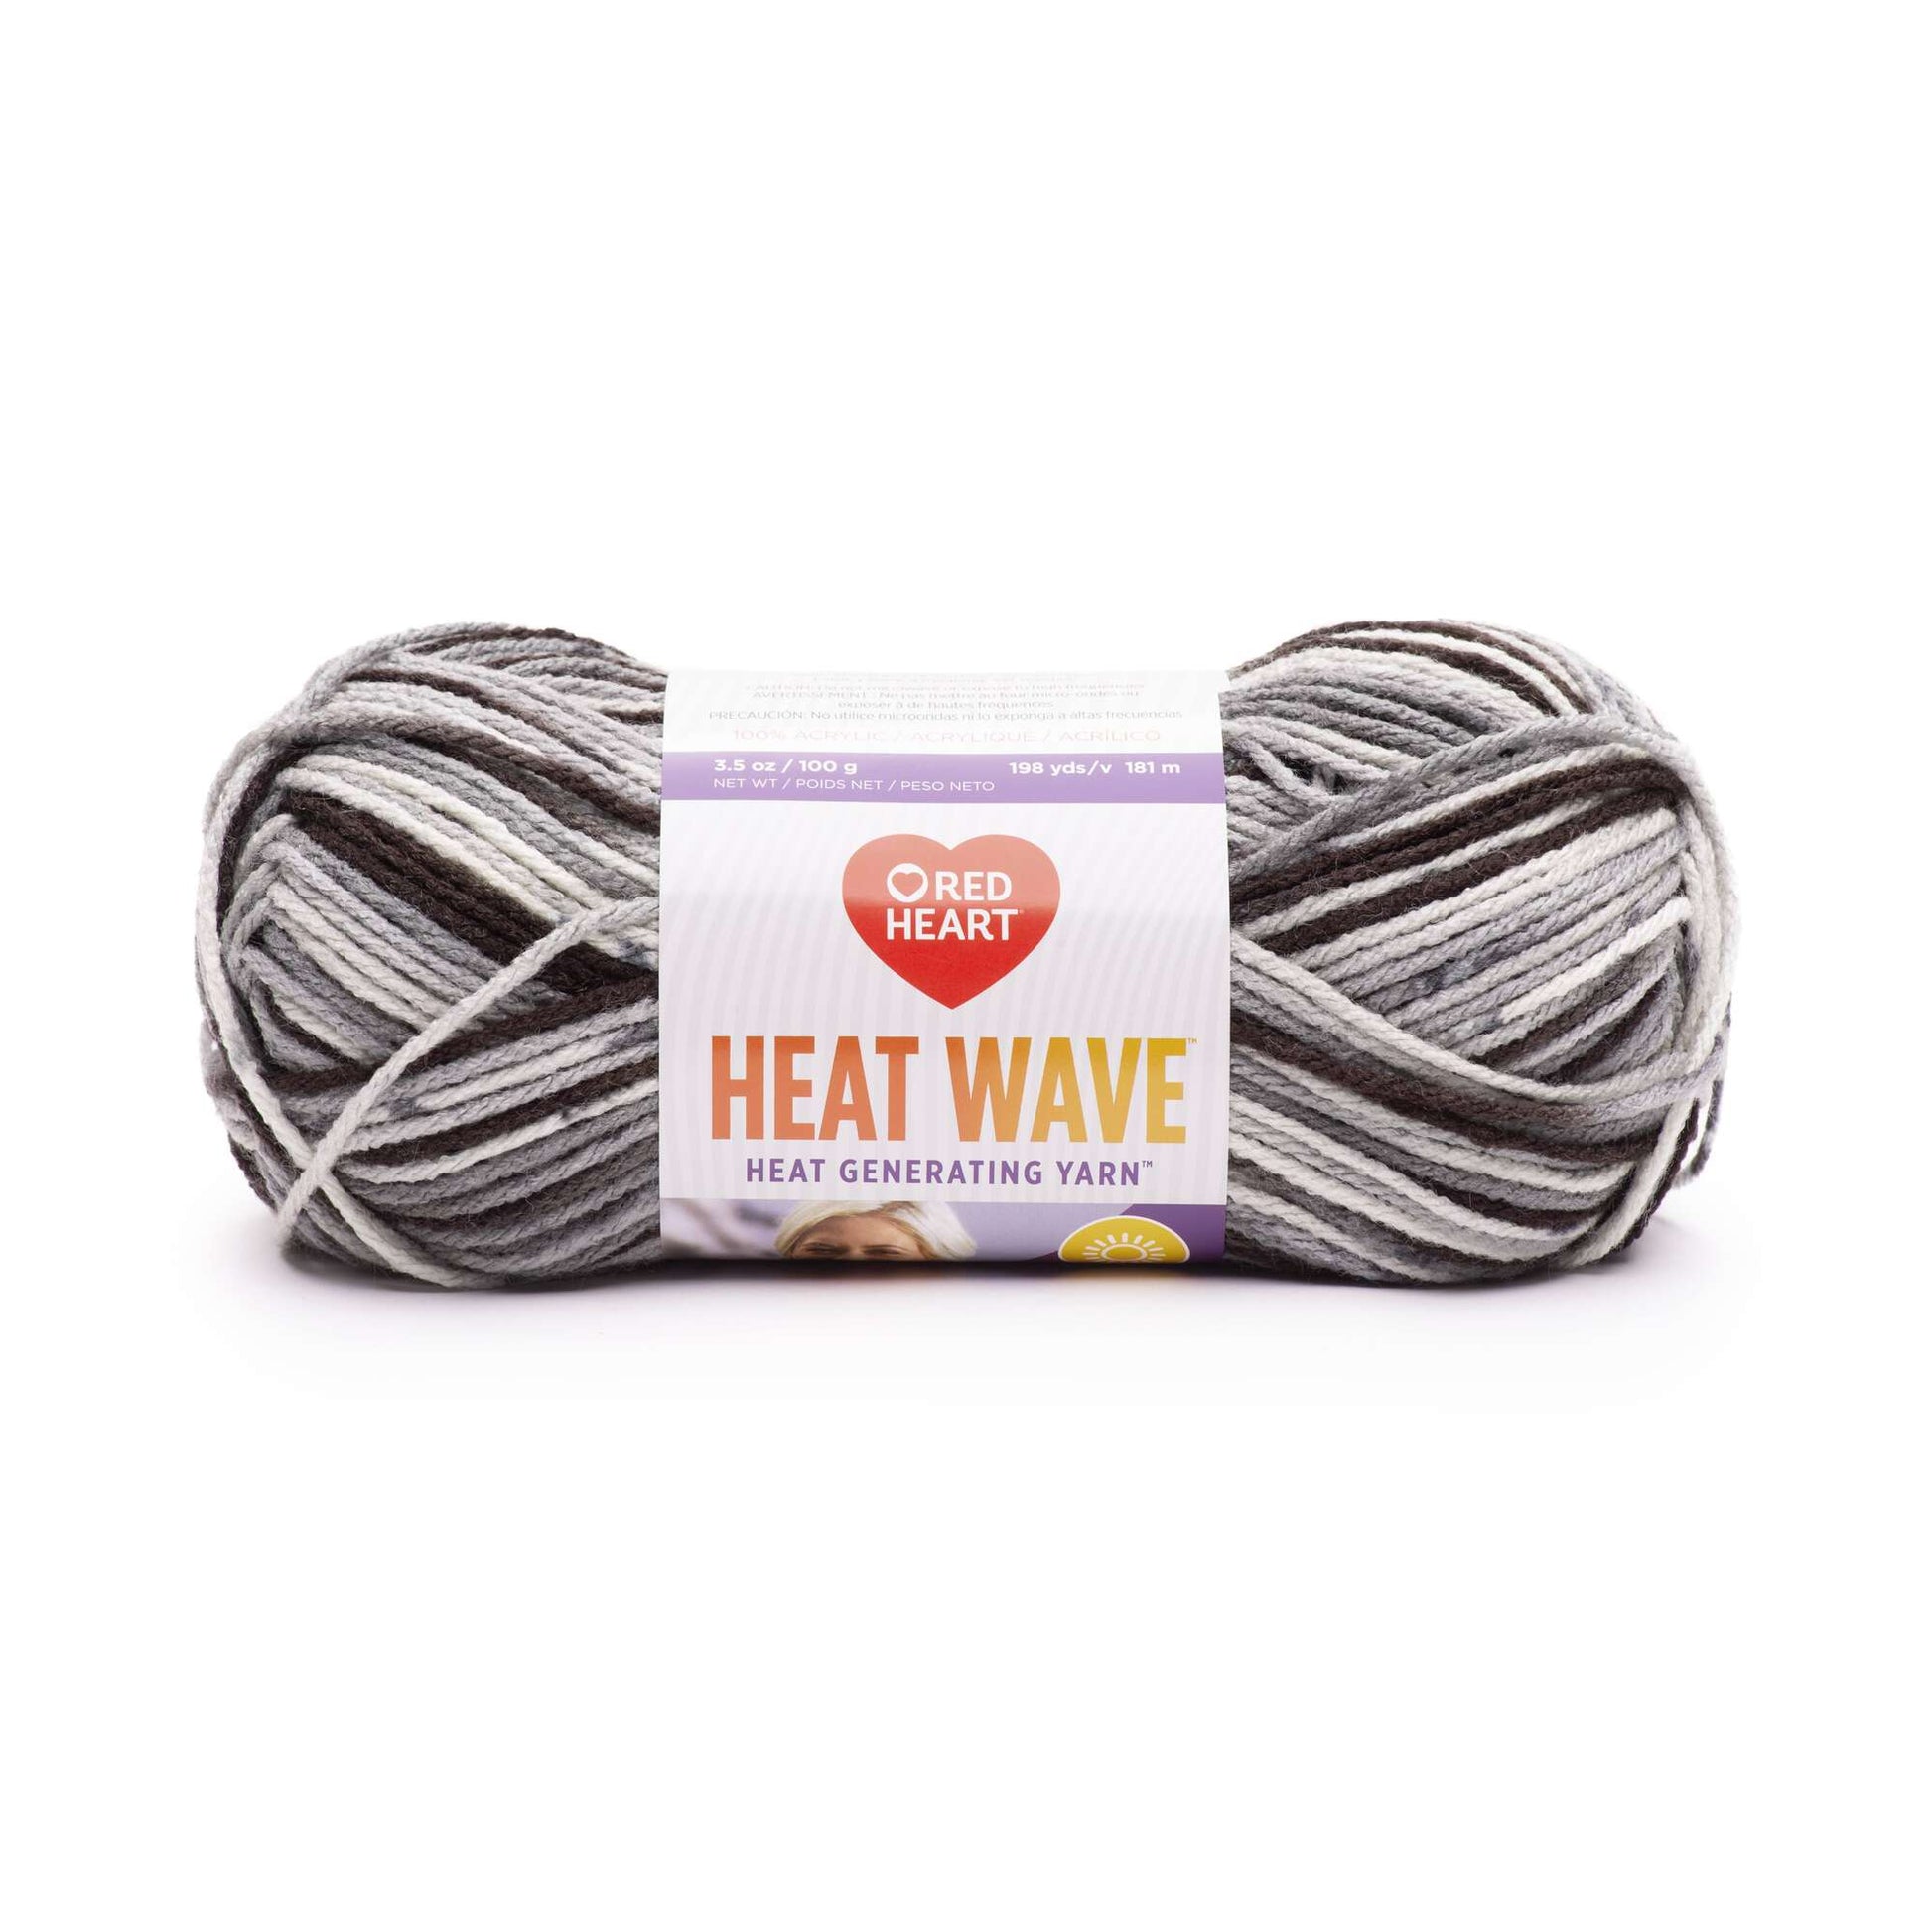 Red Heart Heat Wave Yarn - Clearance shades Thunderstorm